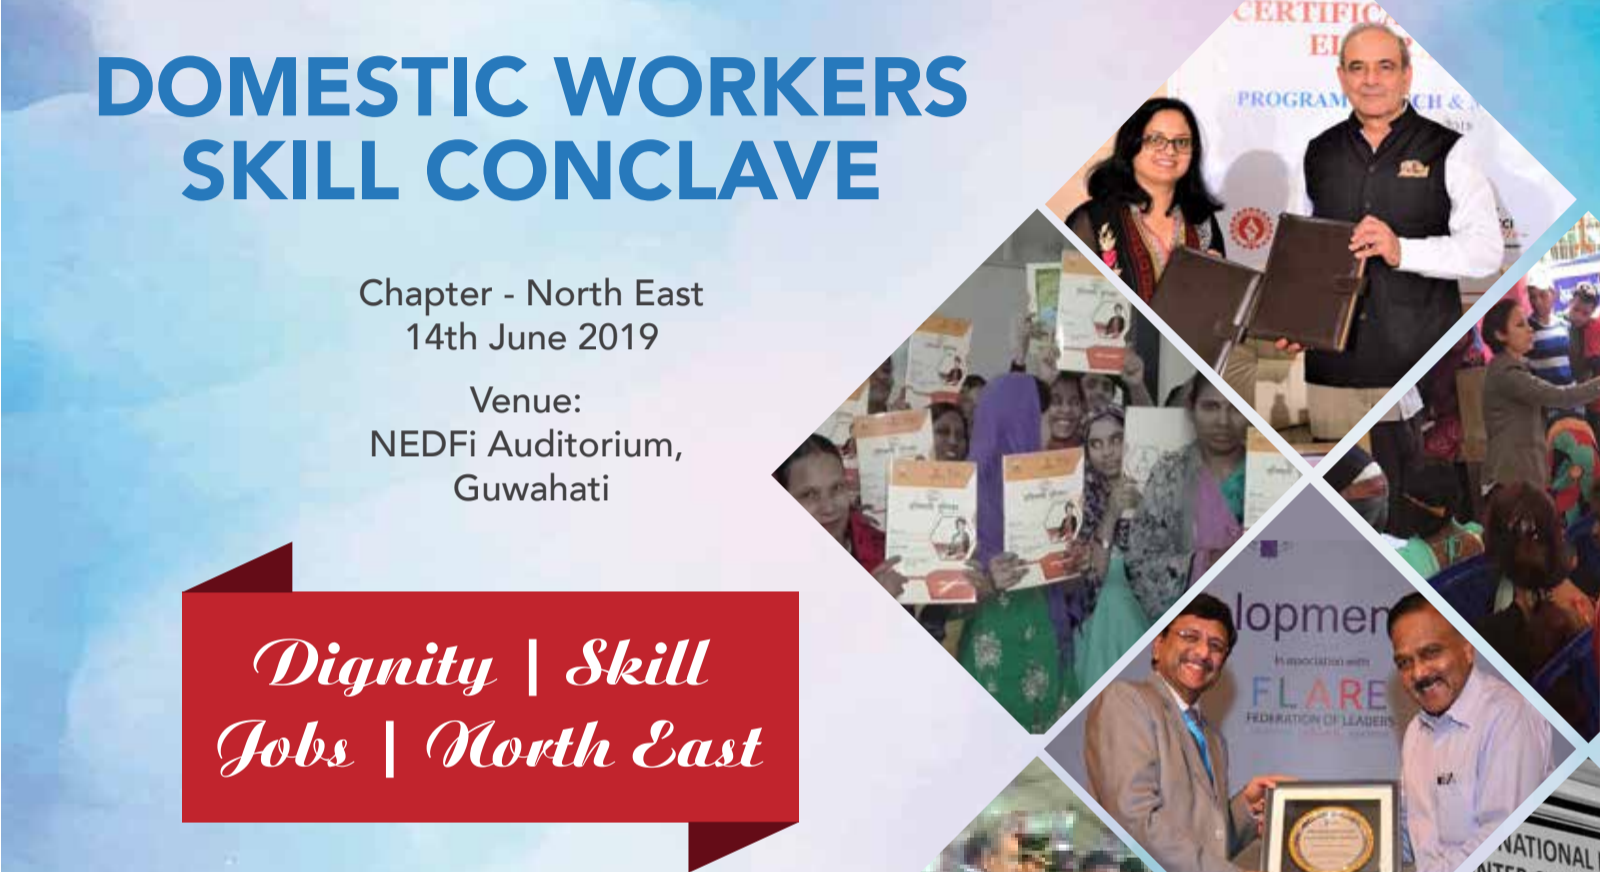 Domestic Workers Skill Conclave at NEDFI Guwahati on June 14th 2019